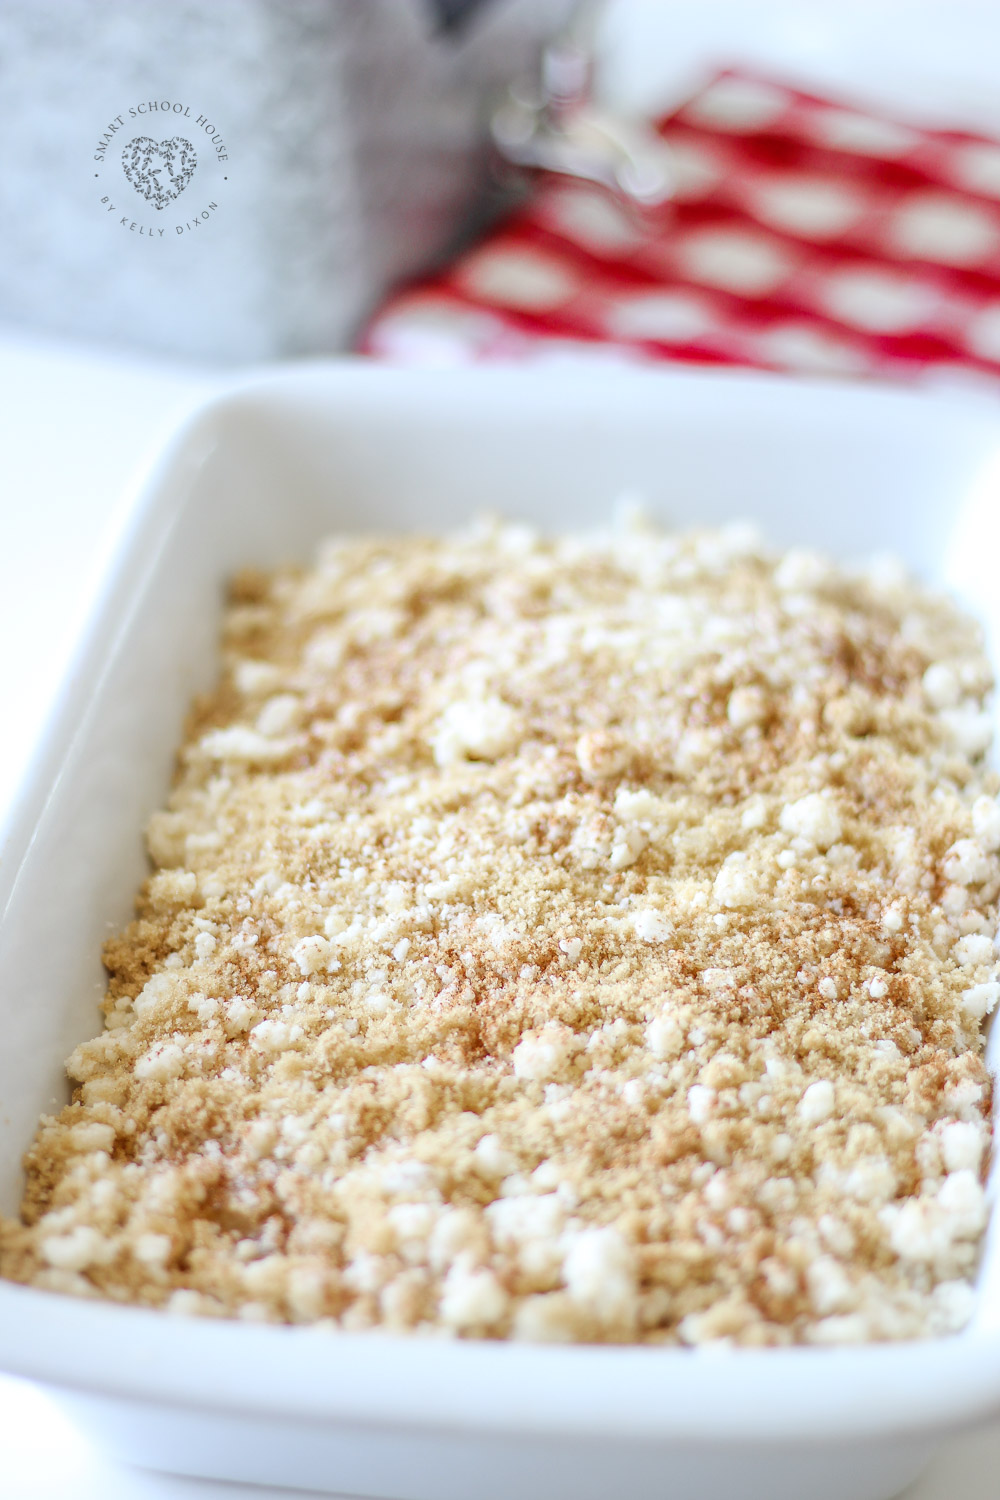 APPLE CINNAMON DUMP CAKE - Made with french vanilla cake mix! Take all 5 ingredients, dump them into a baking dish, and serve it warm with ice cream. This cake disappears in no time!!!! #DumpCake #applecinnamon #applerecipes